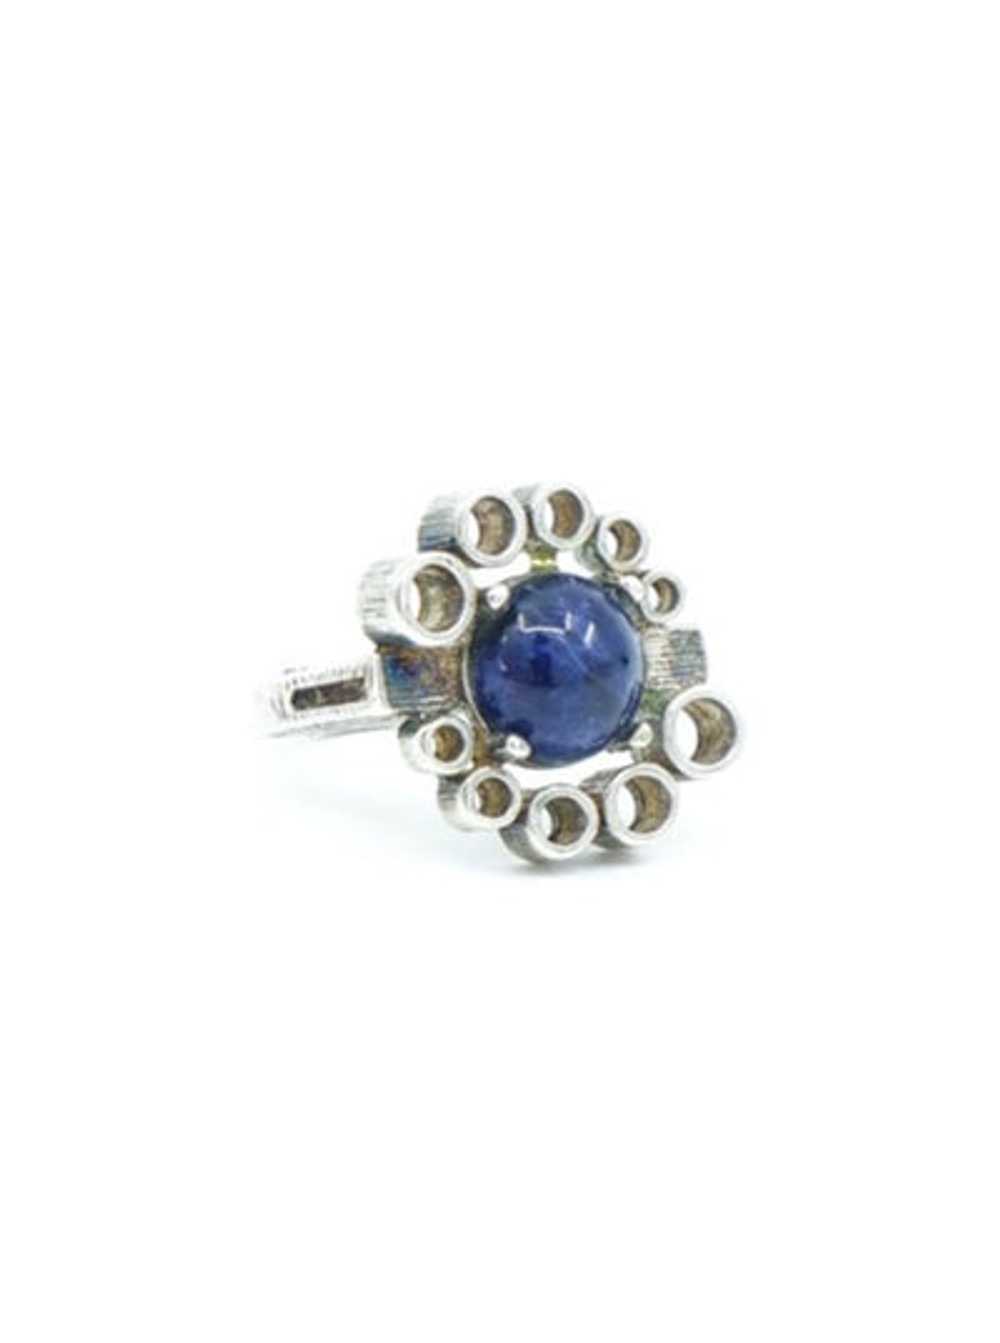 Sterling Silver Lapis Stone Ring - image 4